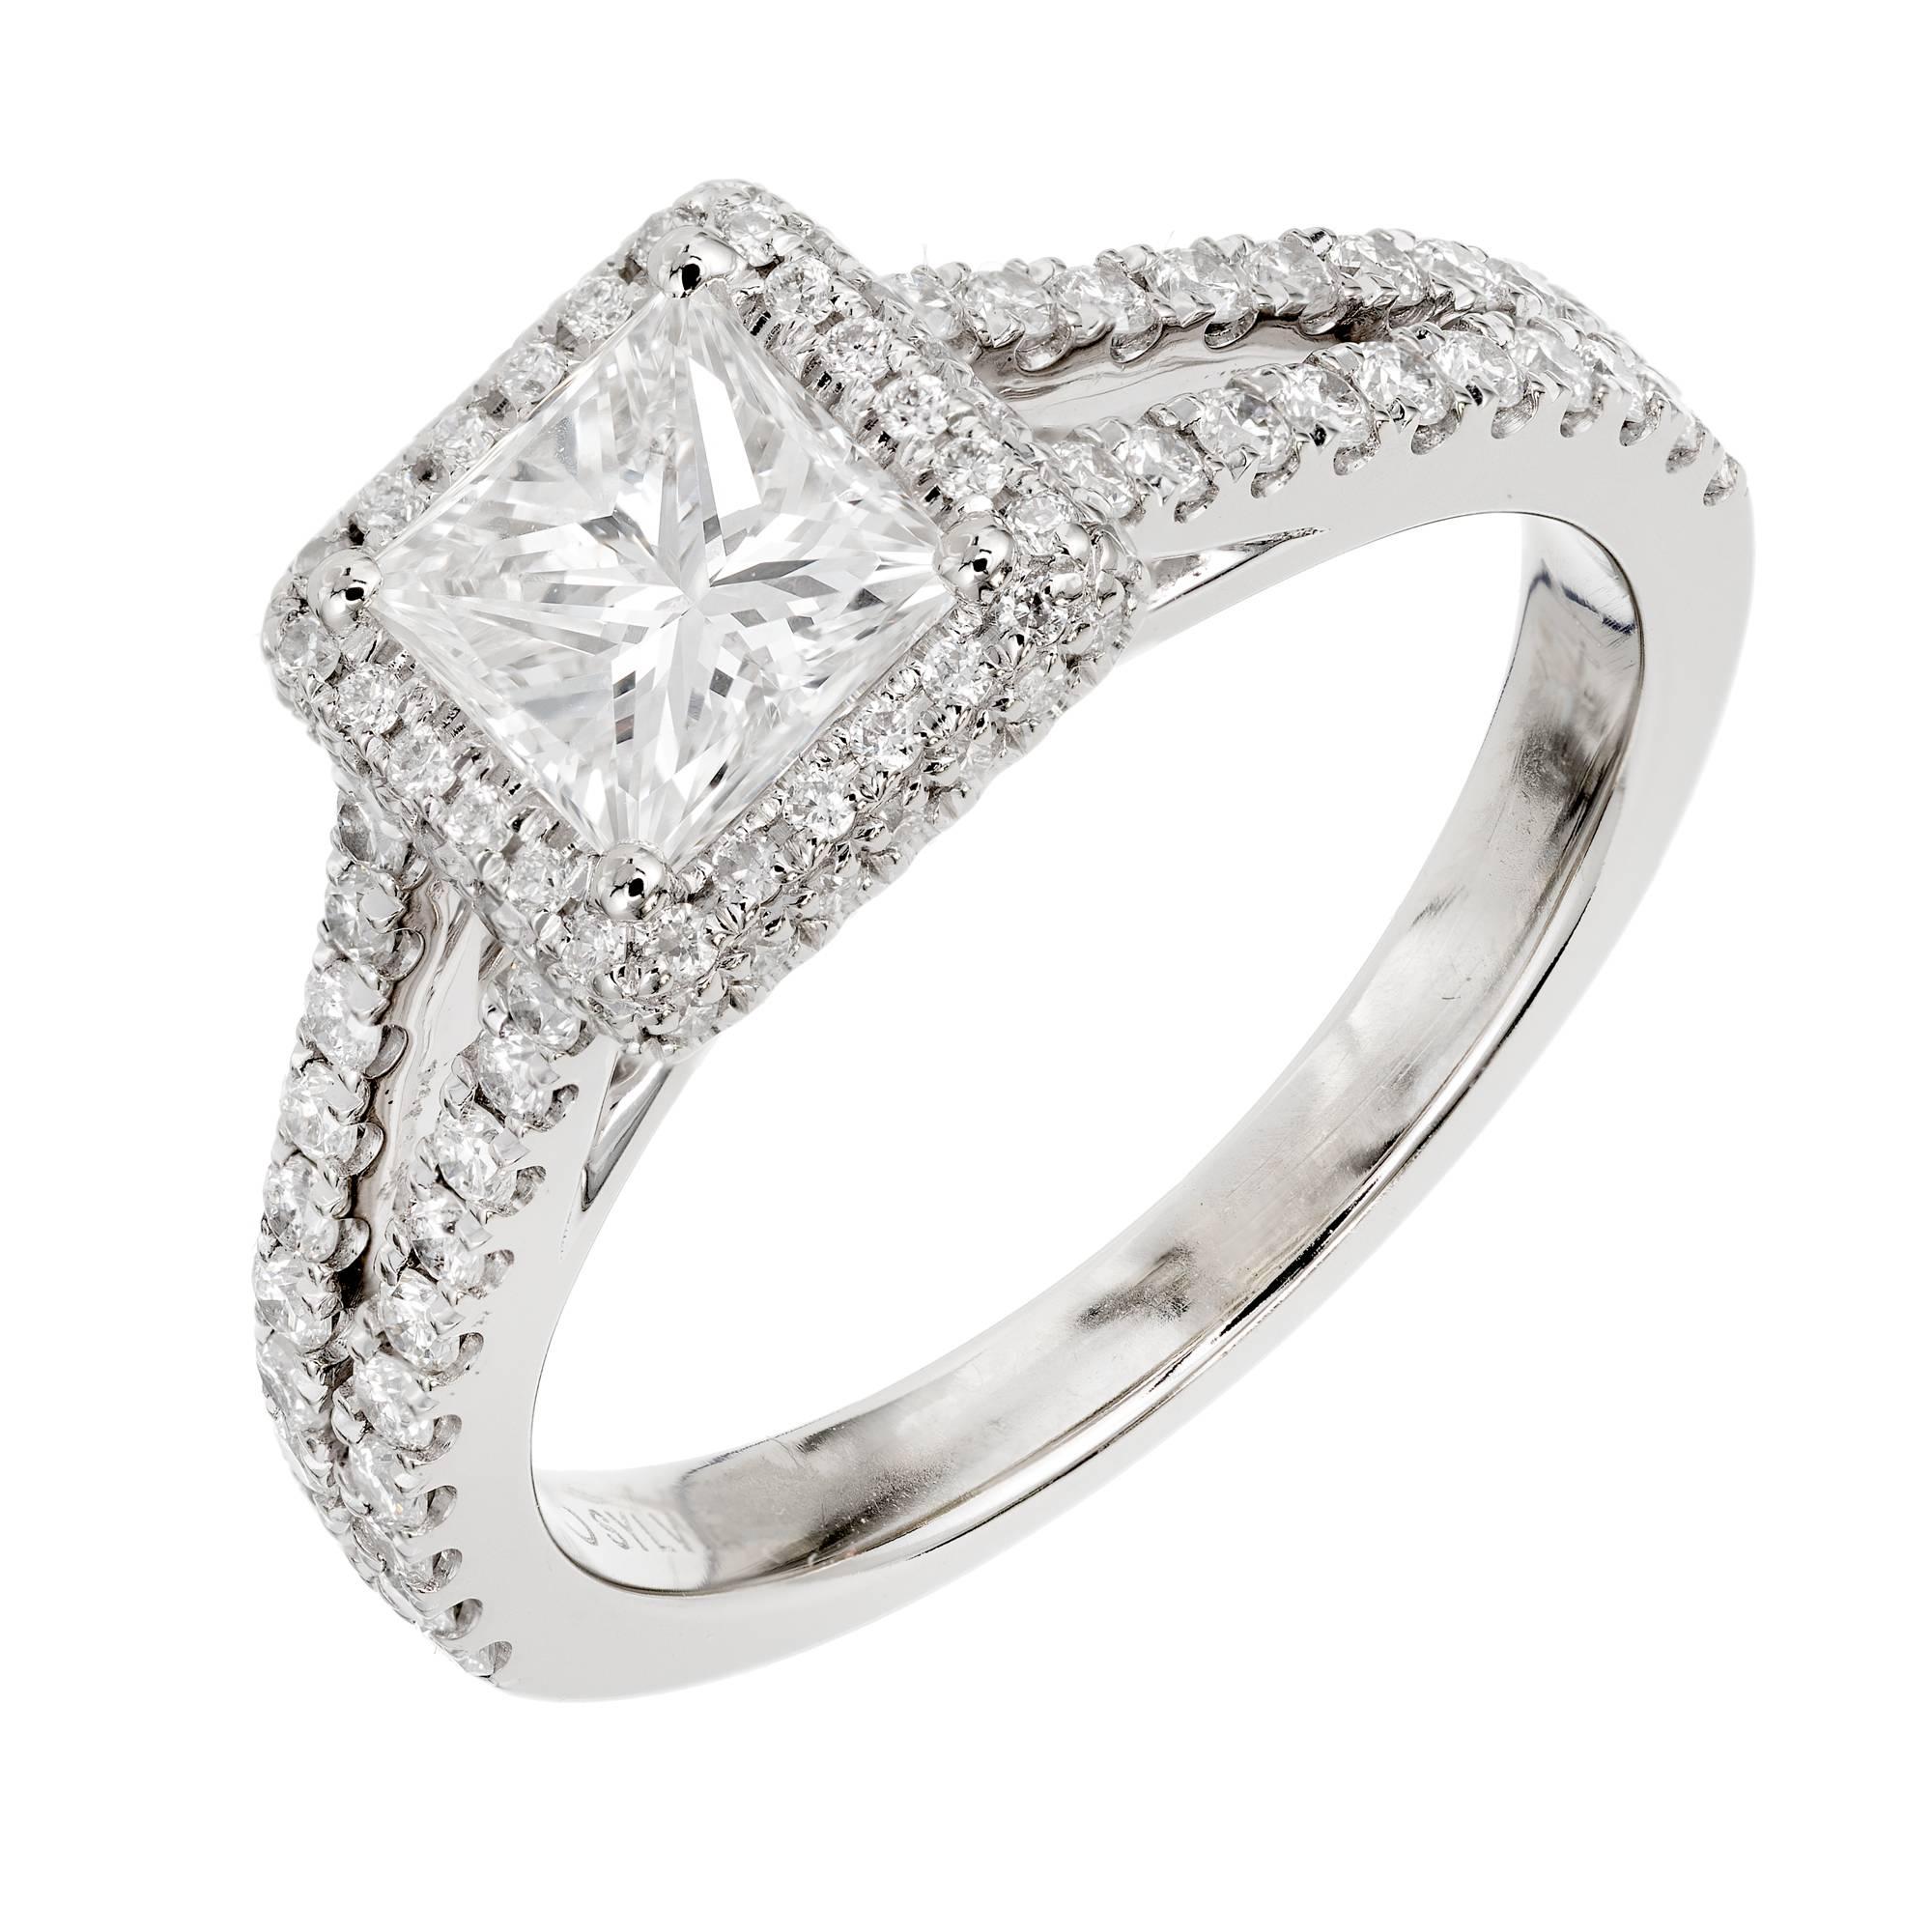 Peter Suchy elegant design split shank Diamond Pavé rolled edge Diamond halo ring with a GIA certified high quality Princess cut Diamond accented by Ideal full cut Diamonds.

1 Princess cut Diamond, approx. total weight .74cts, G, VS1, GIA